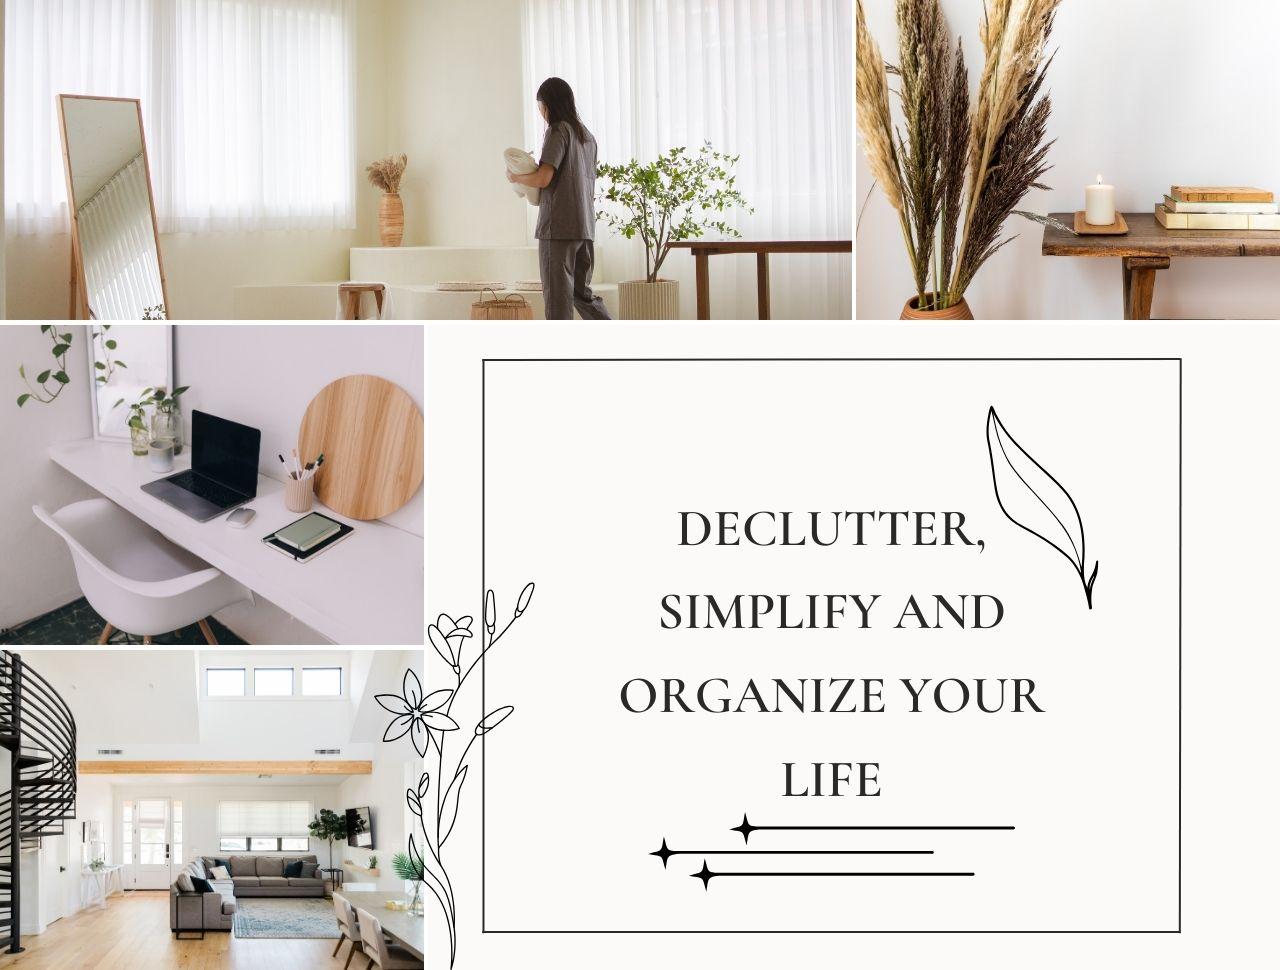 Minimalist Lifestyle Tips: Declutter, Simplify, and Organize Your Life